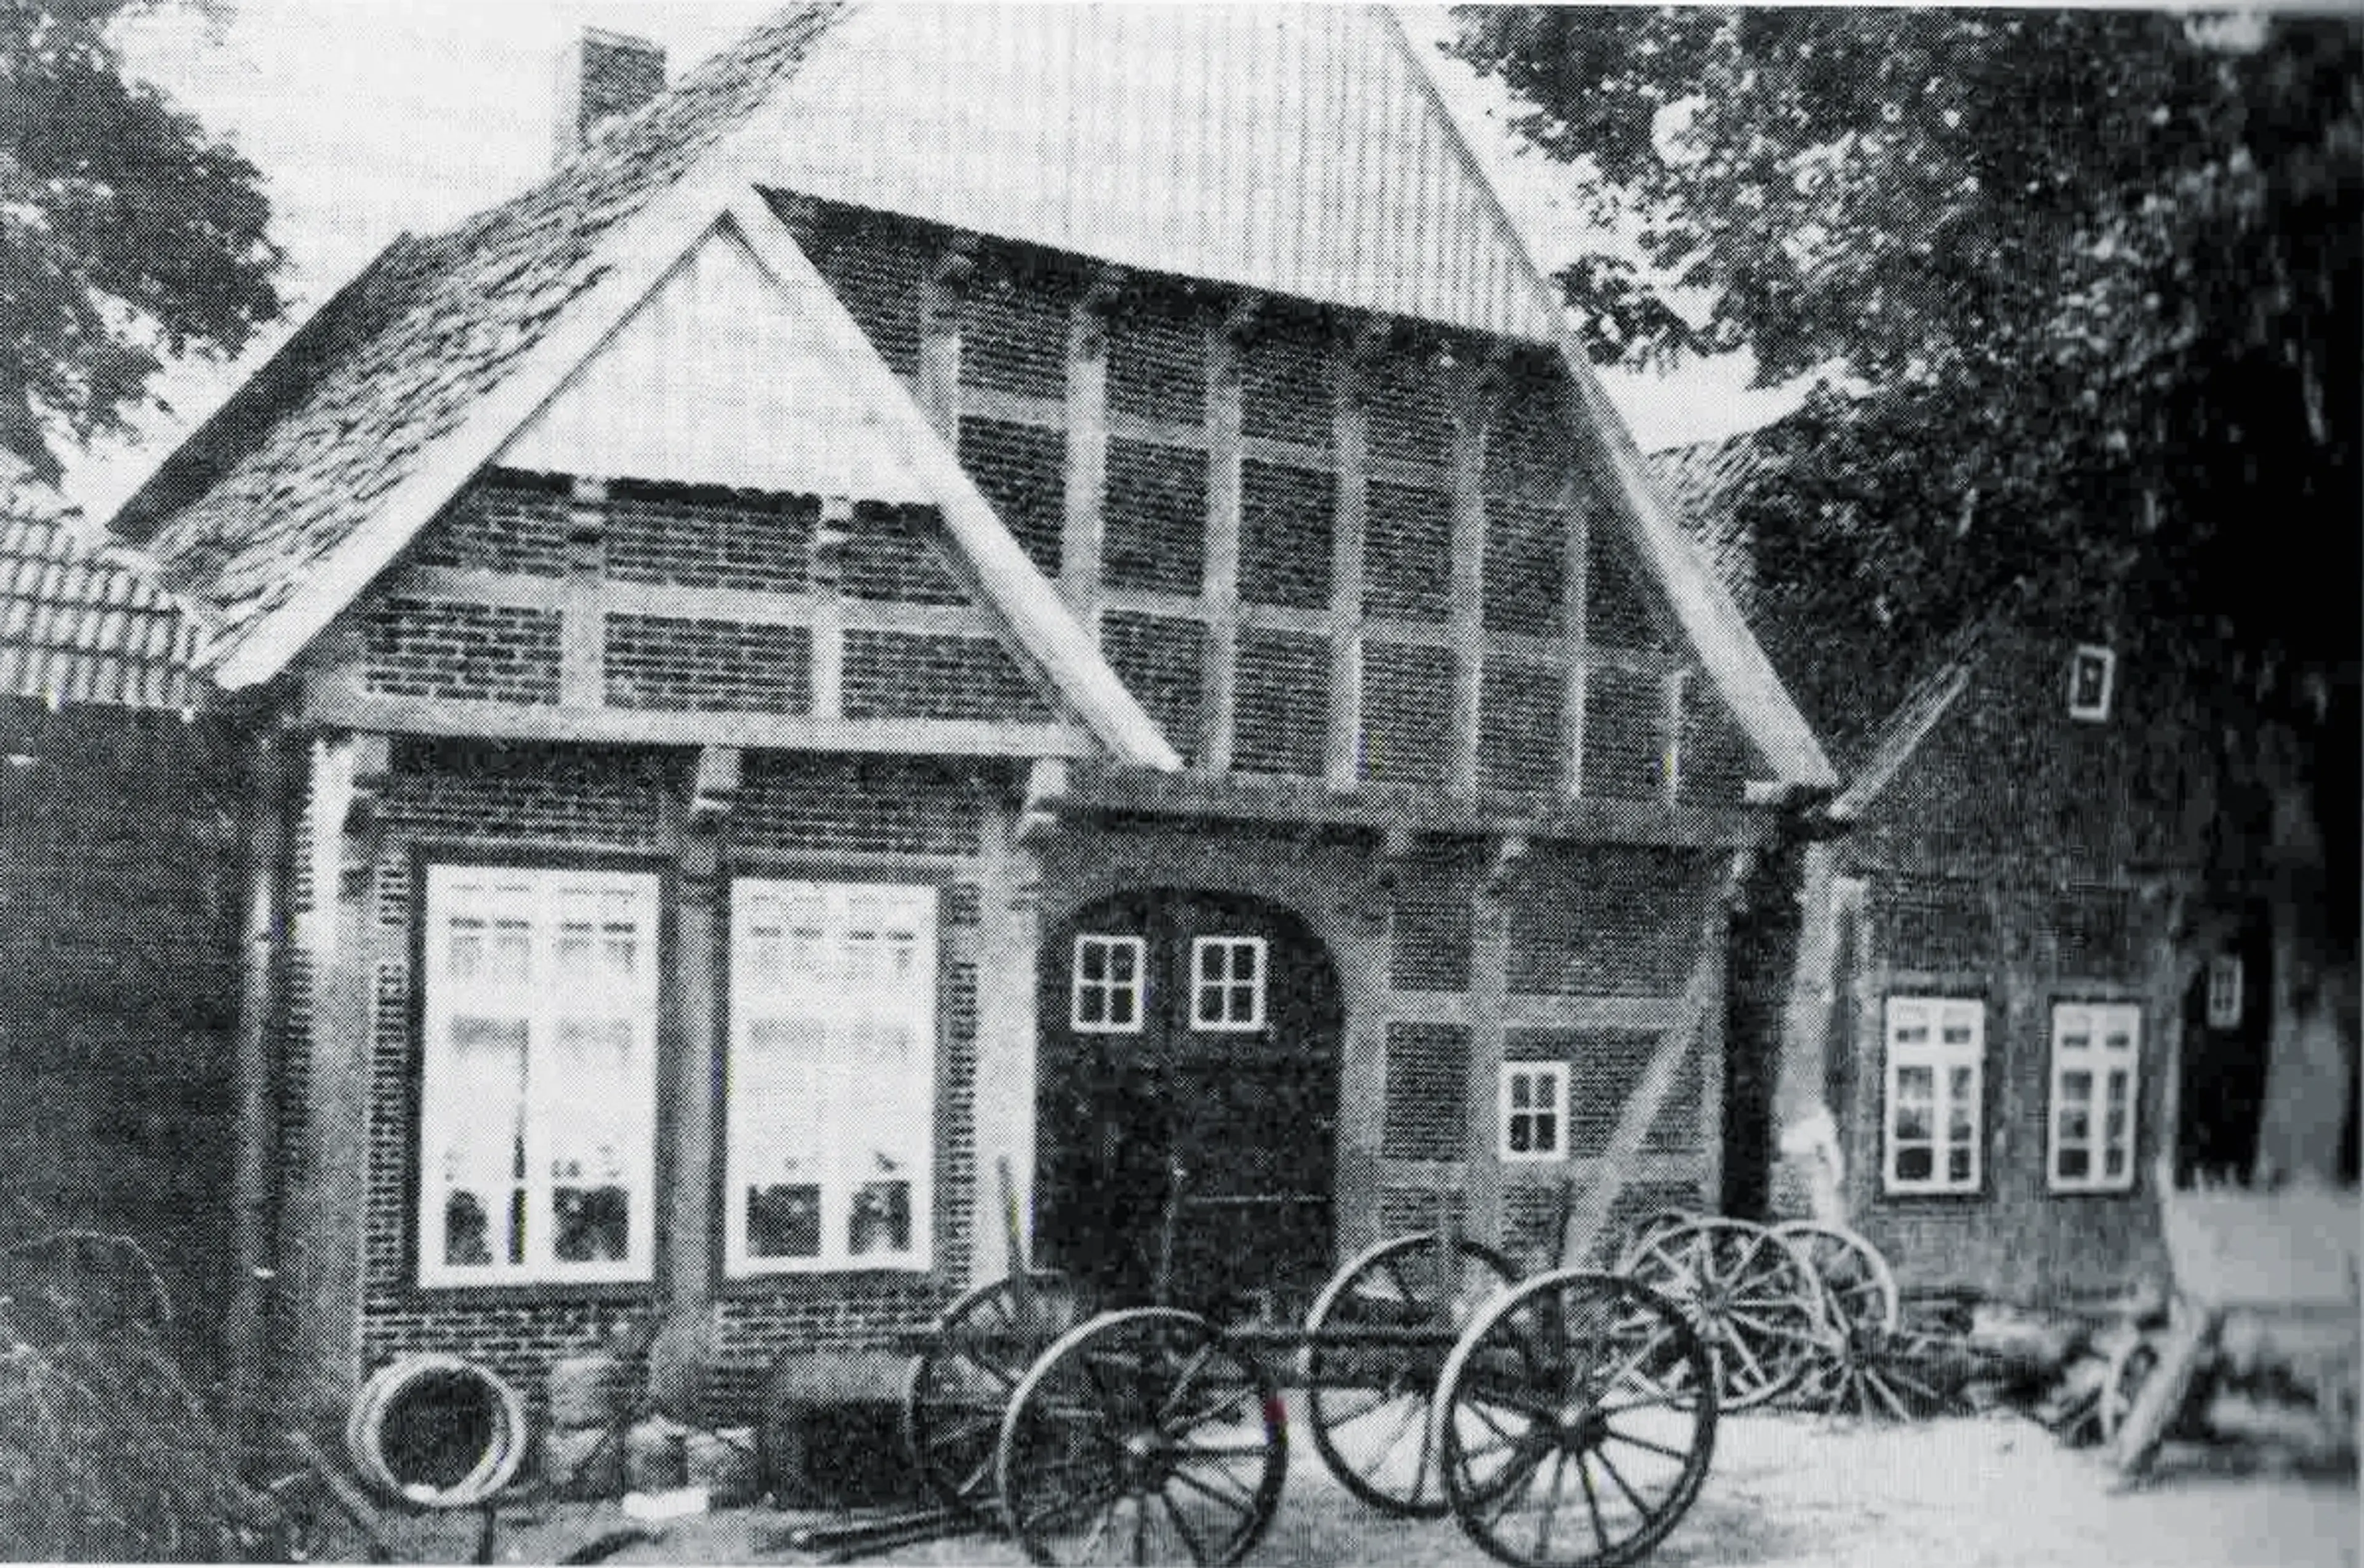 A photo of the historic GRIMME forge from the 19th century